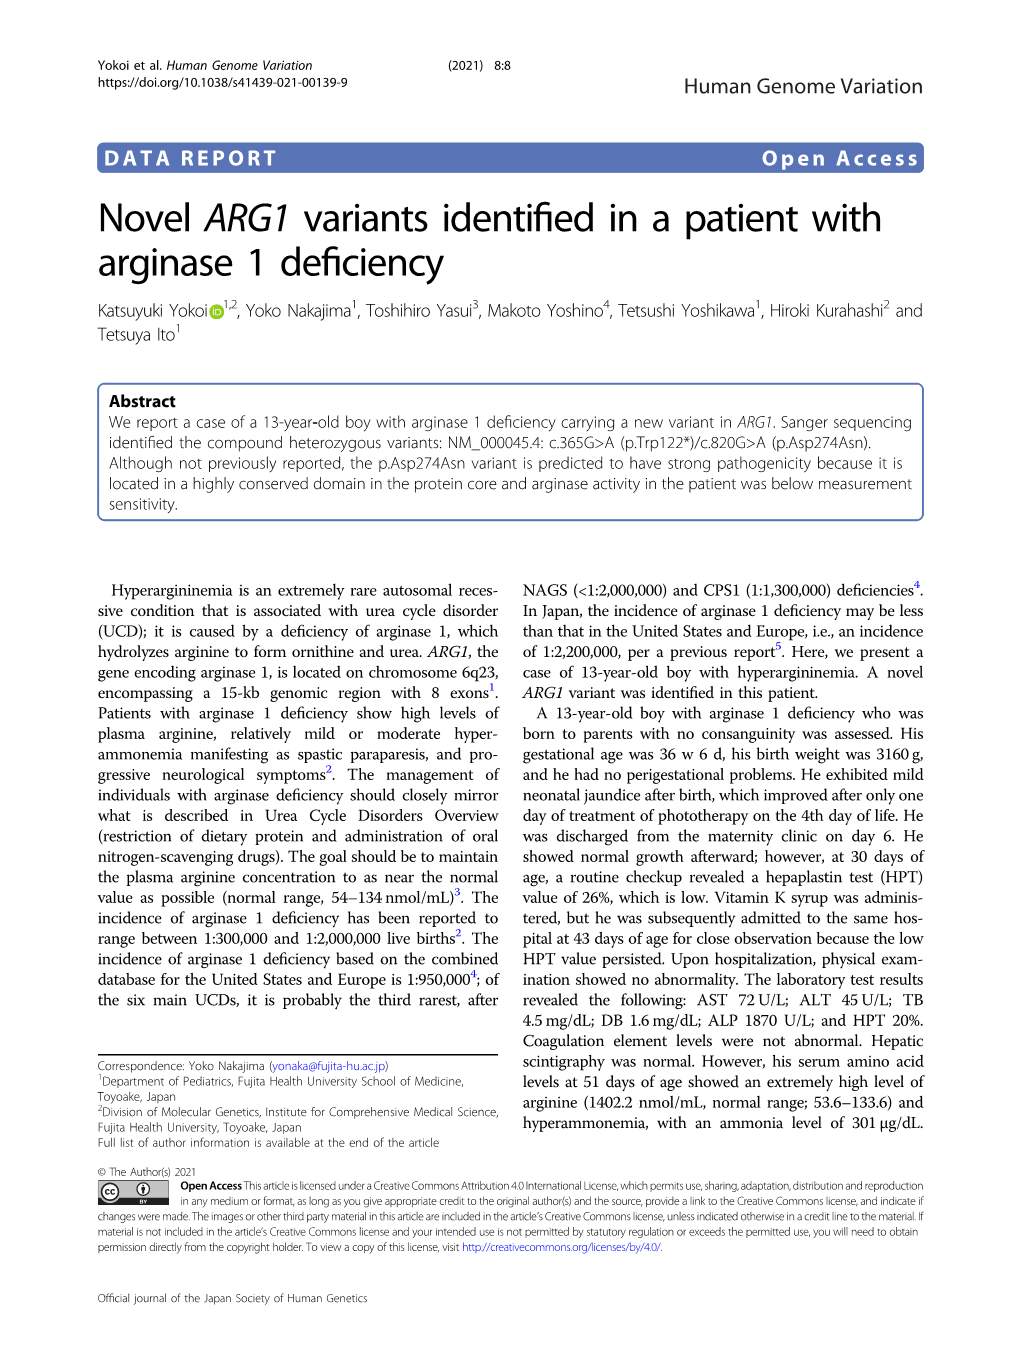 Novel ARG1 Variants Identified in a Patient with Arginase 1 Deficiency